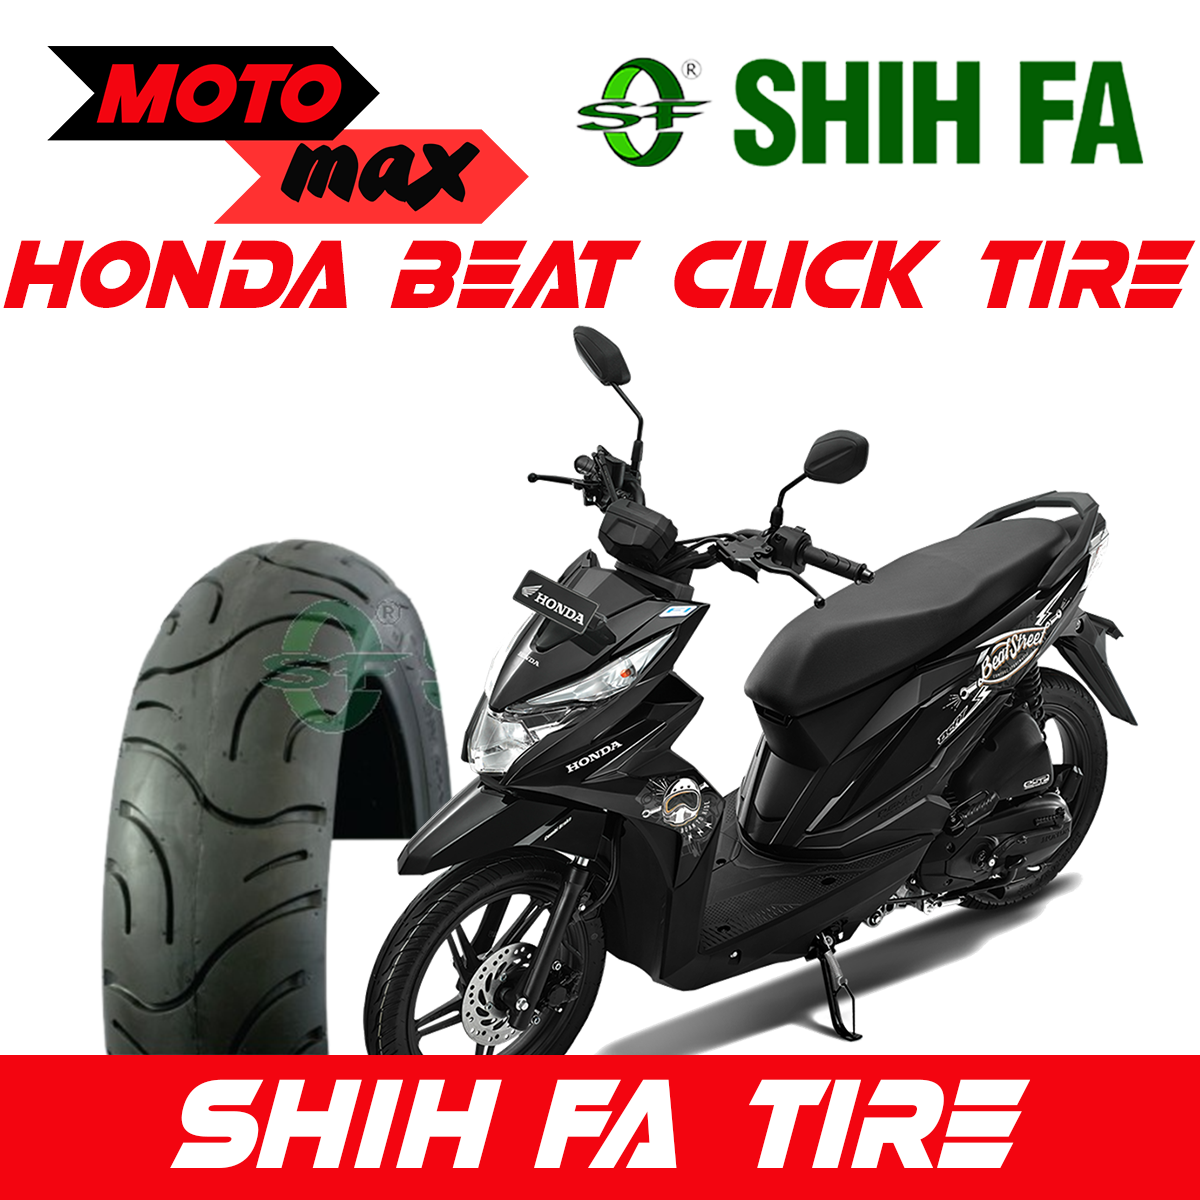 Motomax Shih Fa Tire for Honda Click Beat Yamaha Mio Tubeless Other Motorcycle and Scooter with 14 mags rims | Lazada